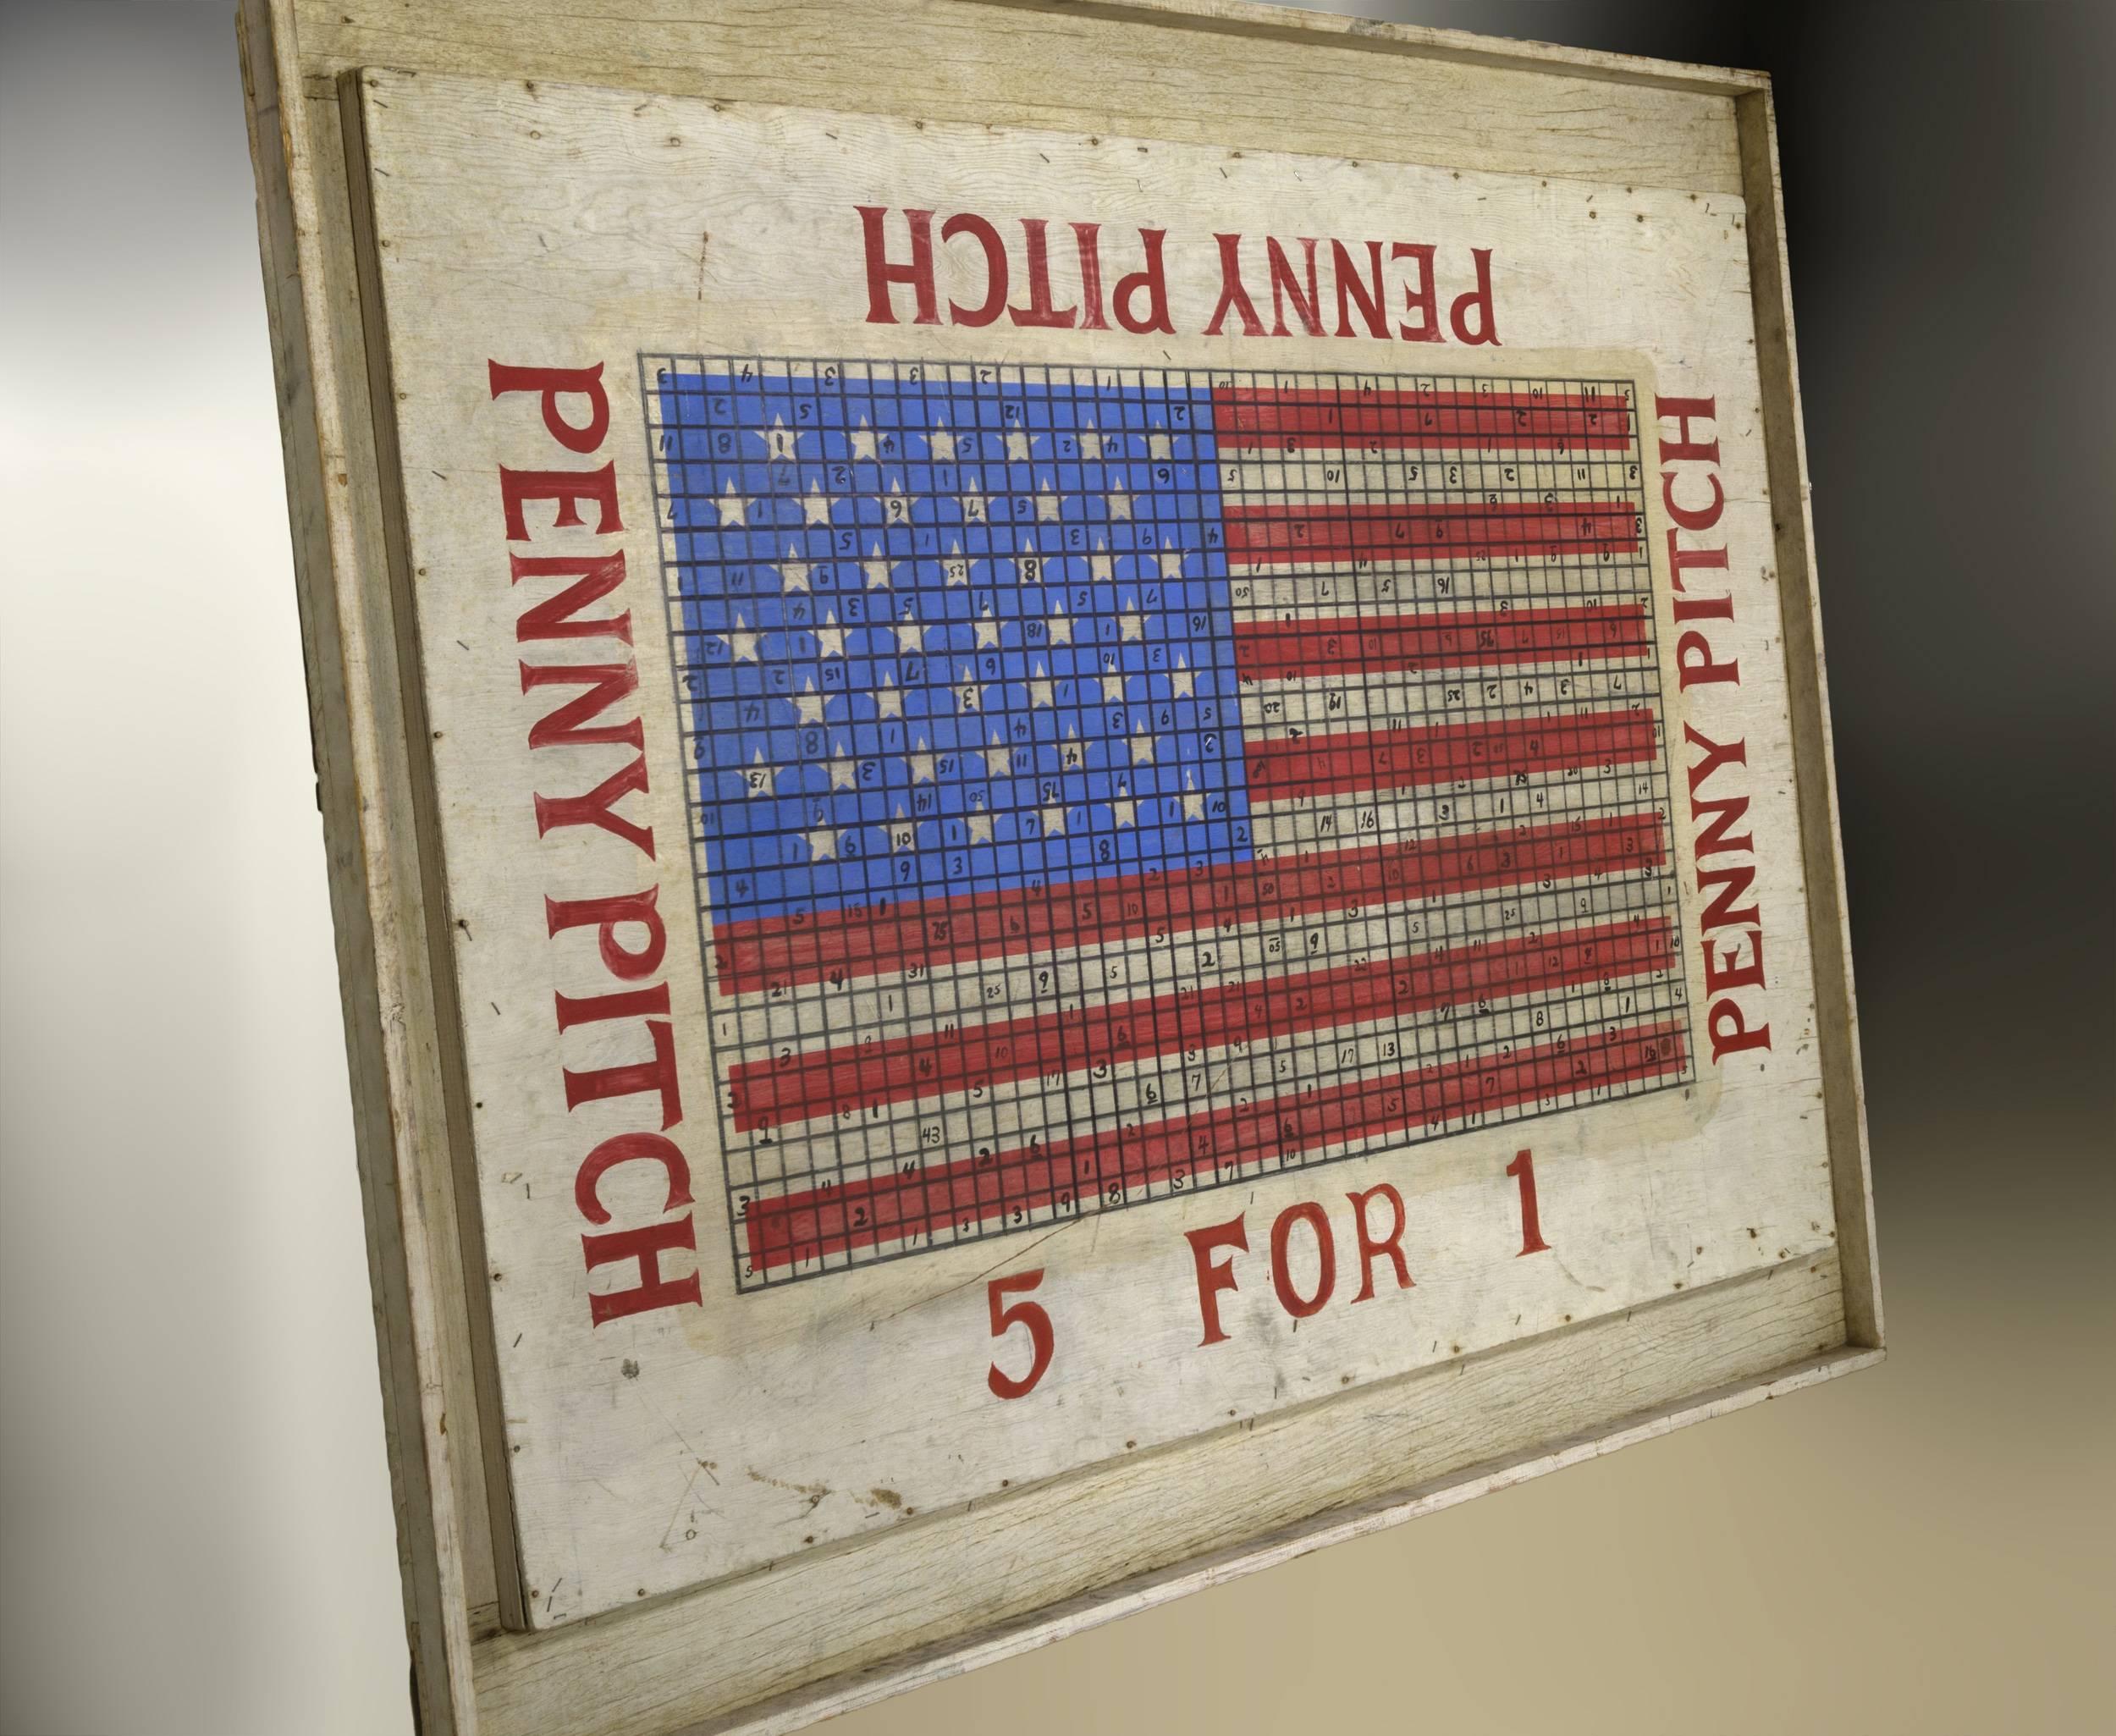 Graphic American flag that’s painted over
plywood with a molded edge and surrounding ditches on all four sides
to catch the sliding pennies. It originally had legs it is now a
piece of vernacular art now hangs on a wall like a